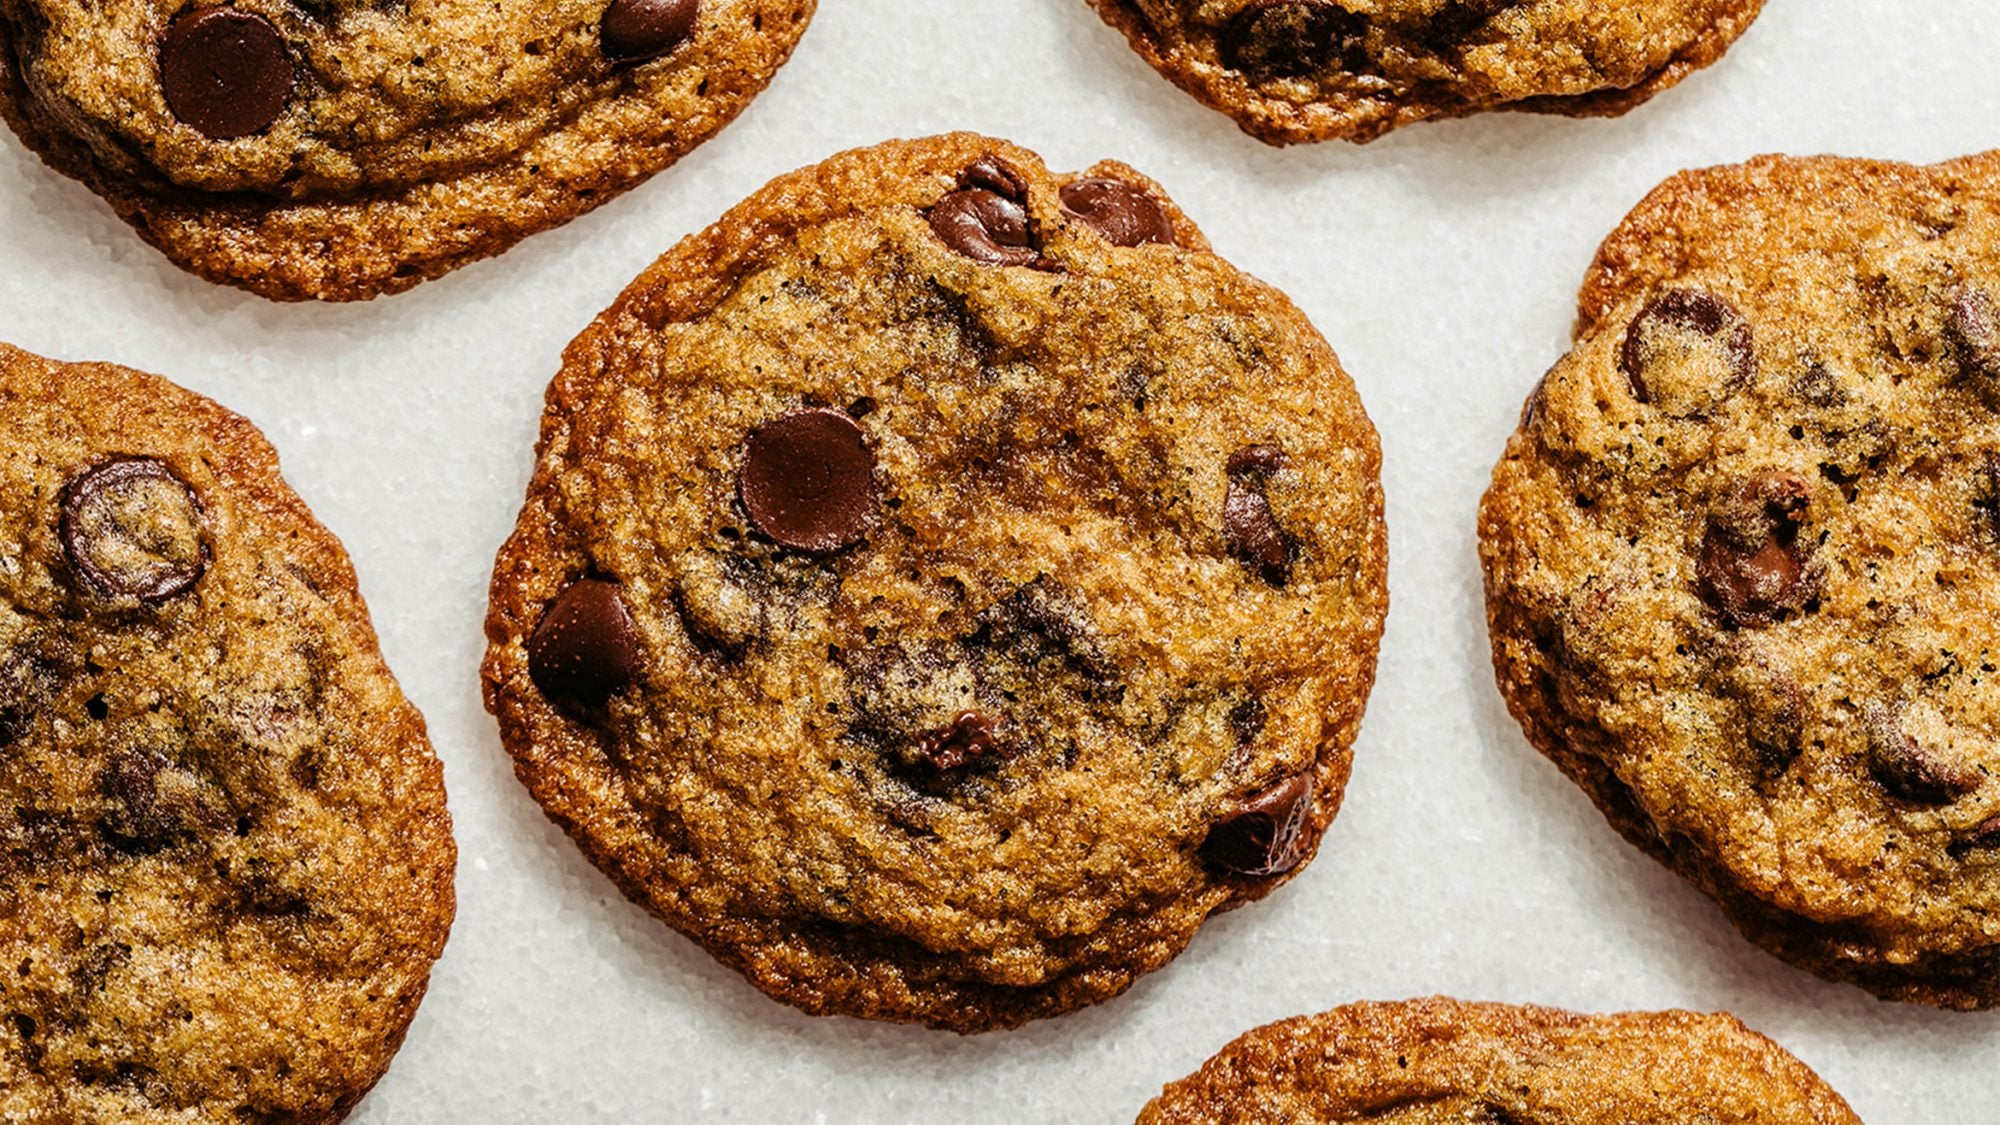 Article-Chocolate-Chip-Cookies